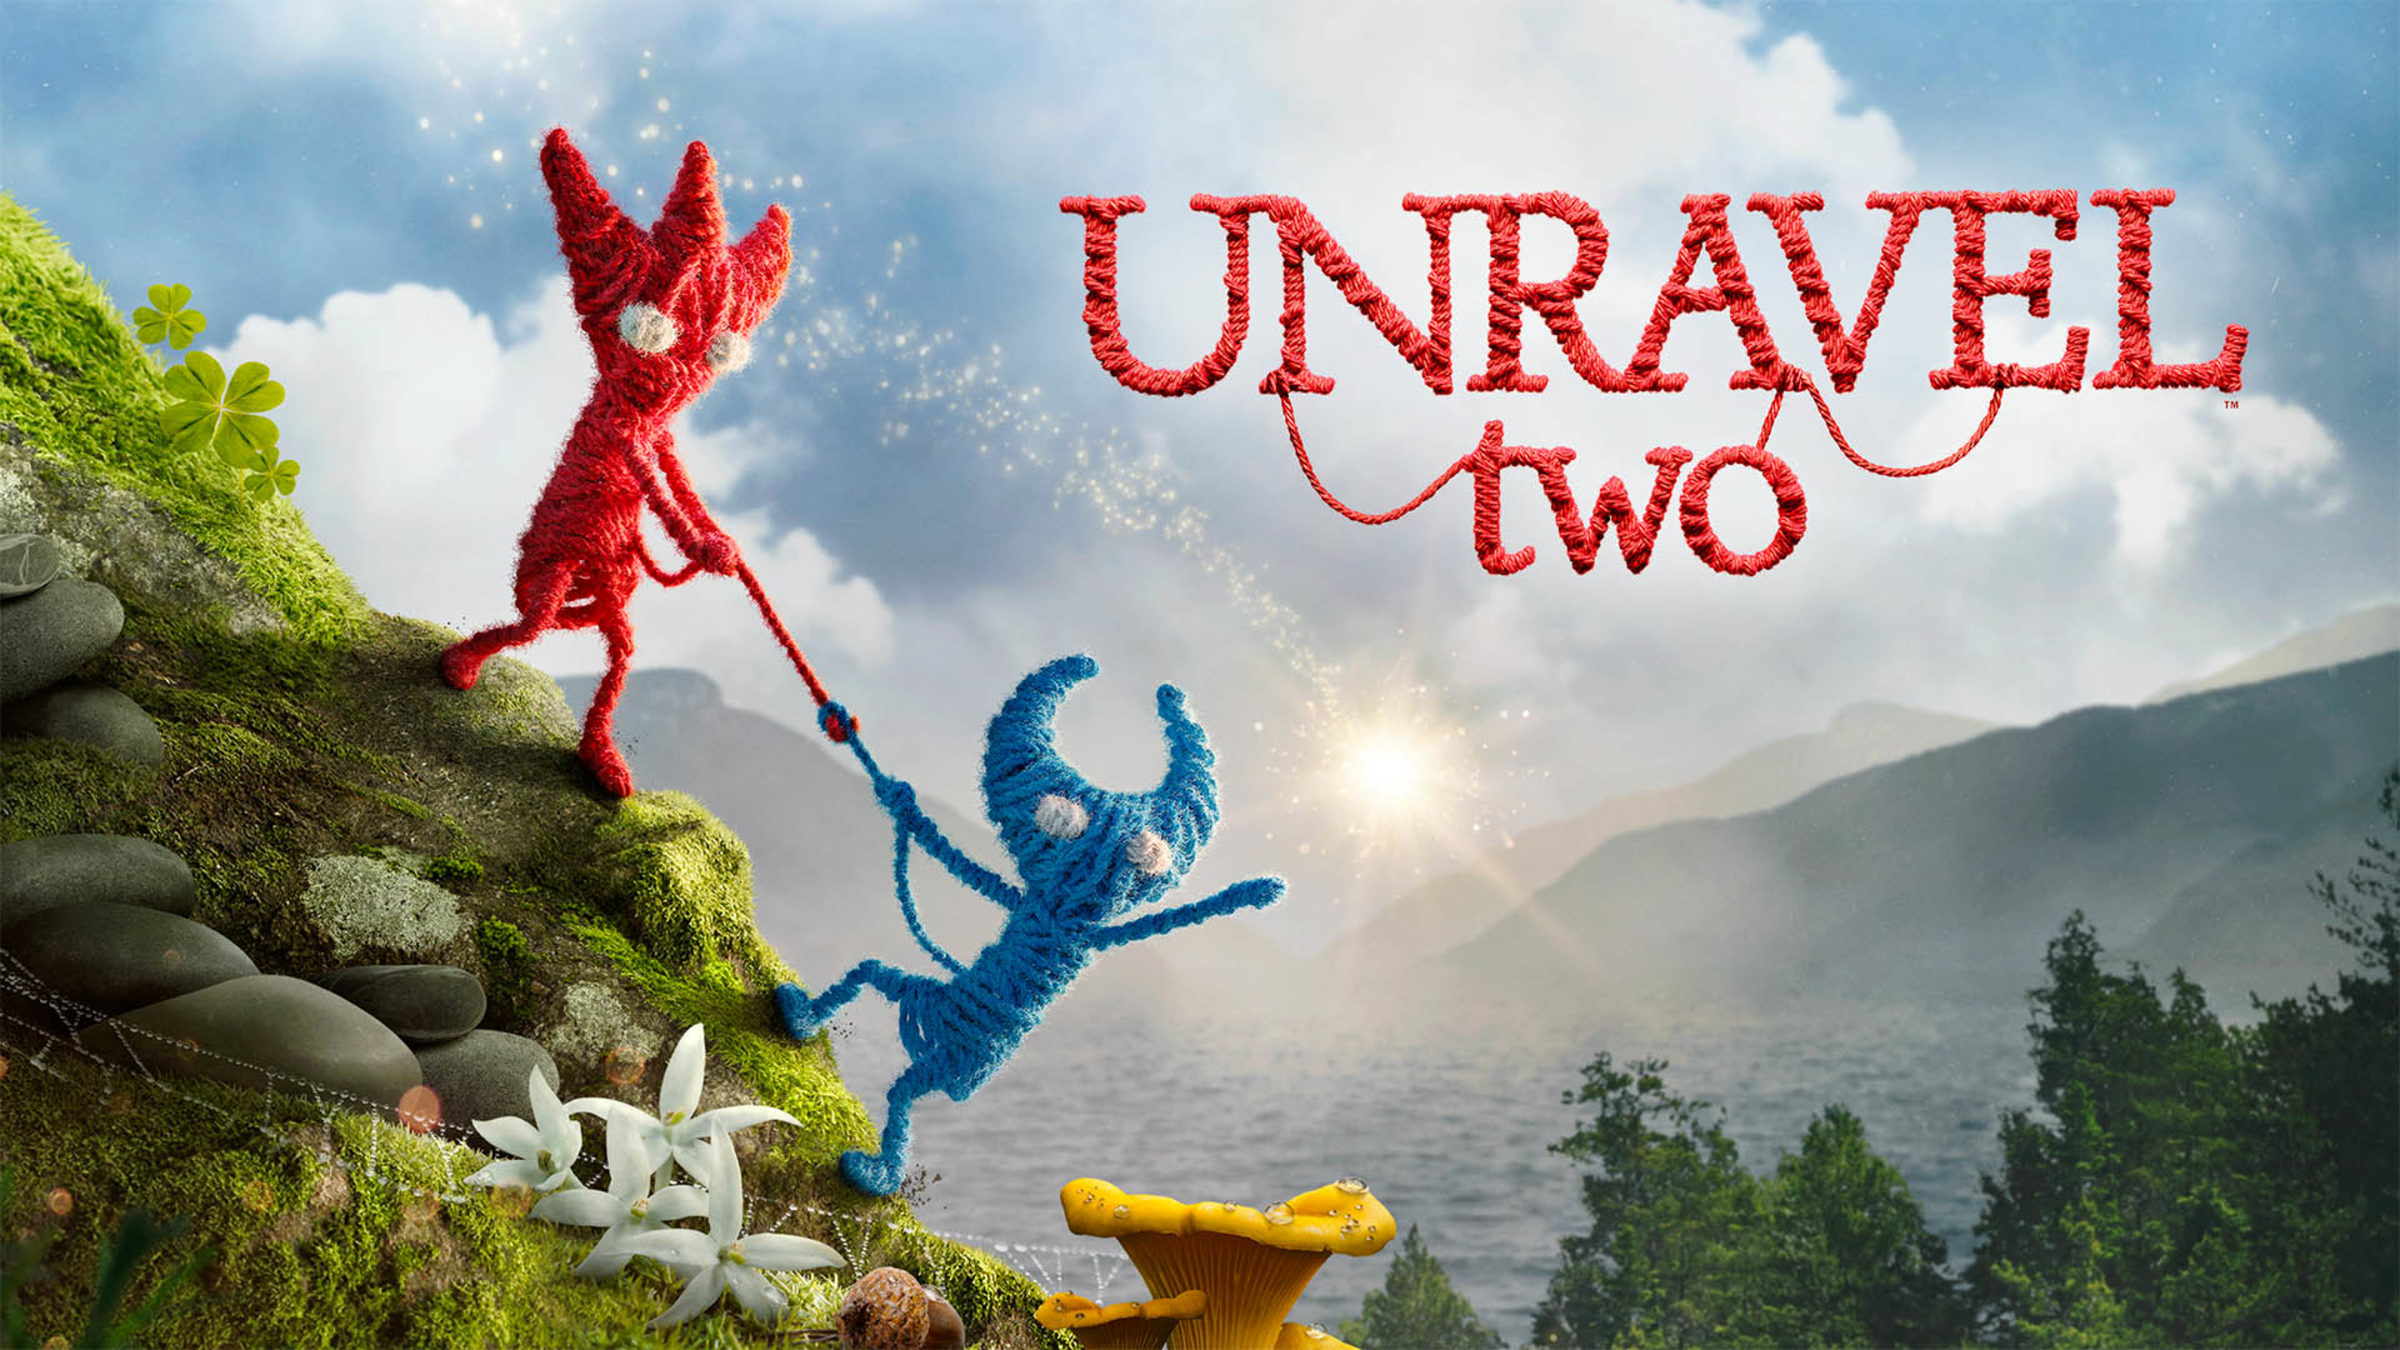 Unravel 2 Not Coming to Nintendo Switch, May Have Co-Op Mode Hints ESRB  Rating